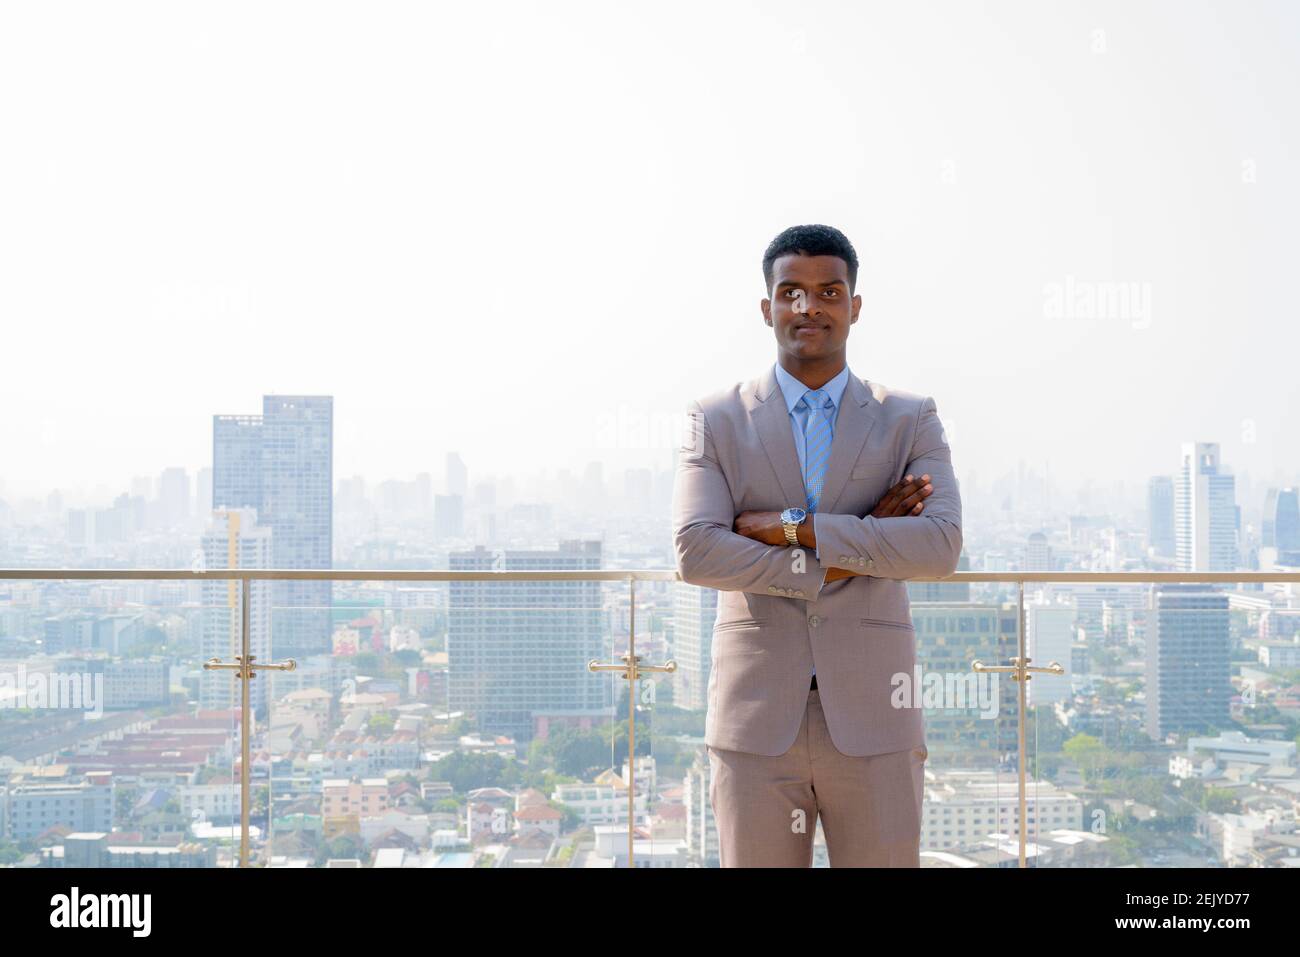 Portrait of handsome young African businessman wearing suit looking confident with arms crossed Stock Photo